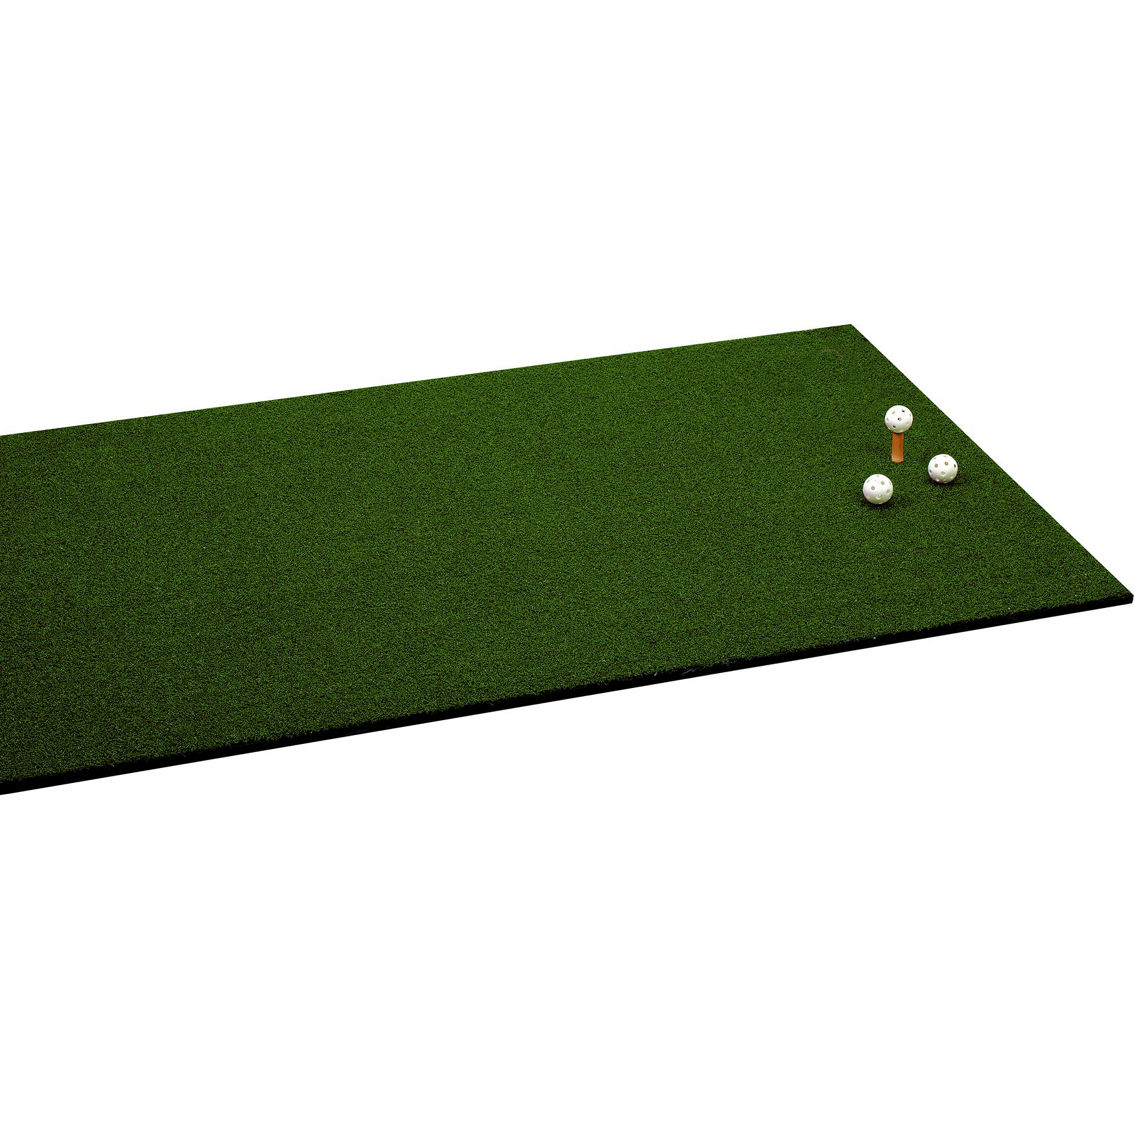 GOLF GIFTS & GALLERY 3X5 THICK TURF MAT - Image 4 of 4